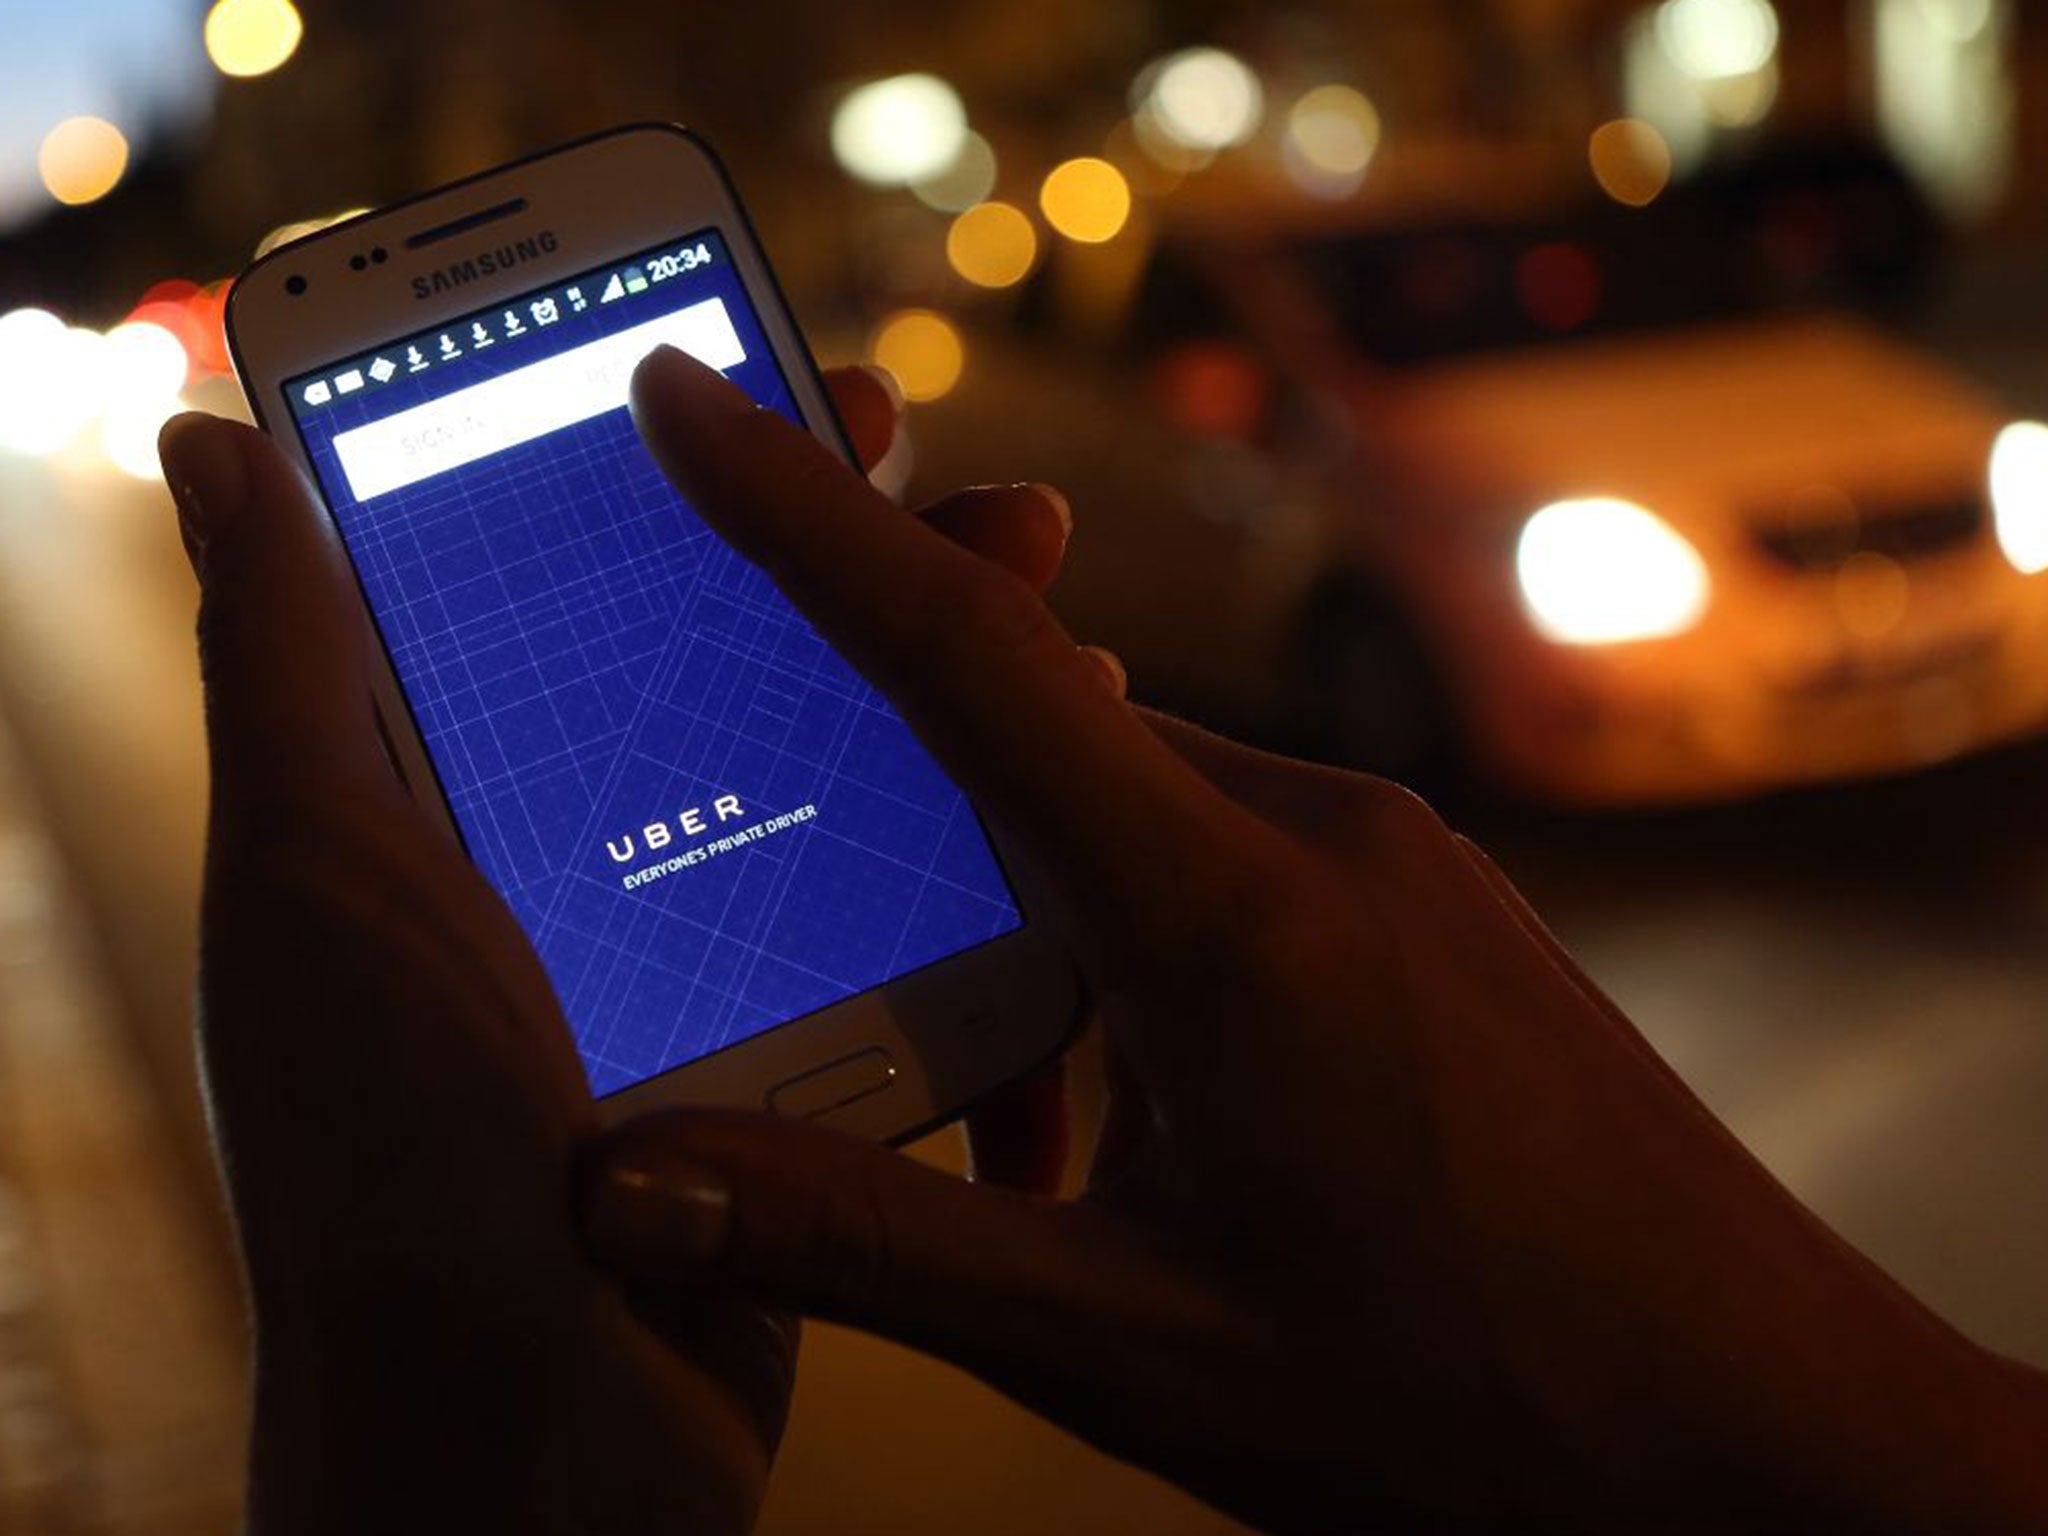 An Uber being hailed in Berlin. The company’s growth beyond Western countries has been harder to manage